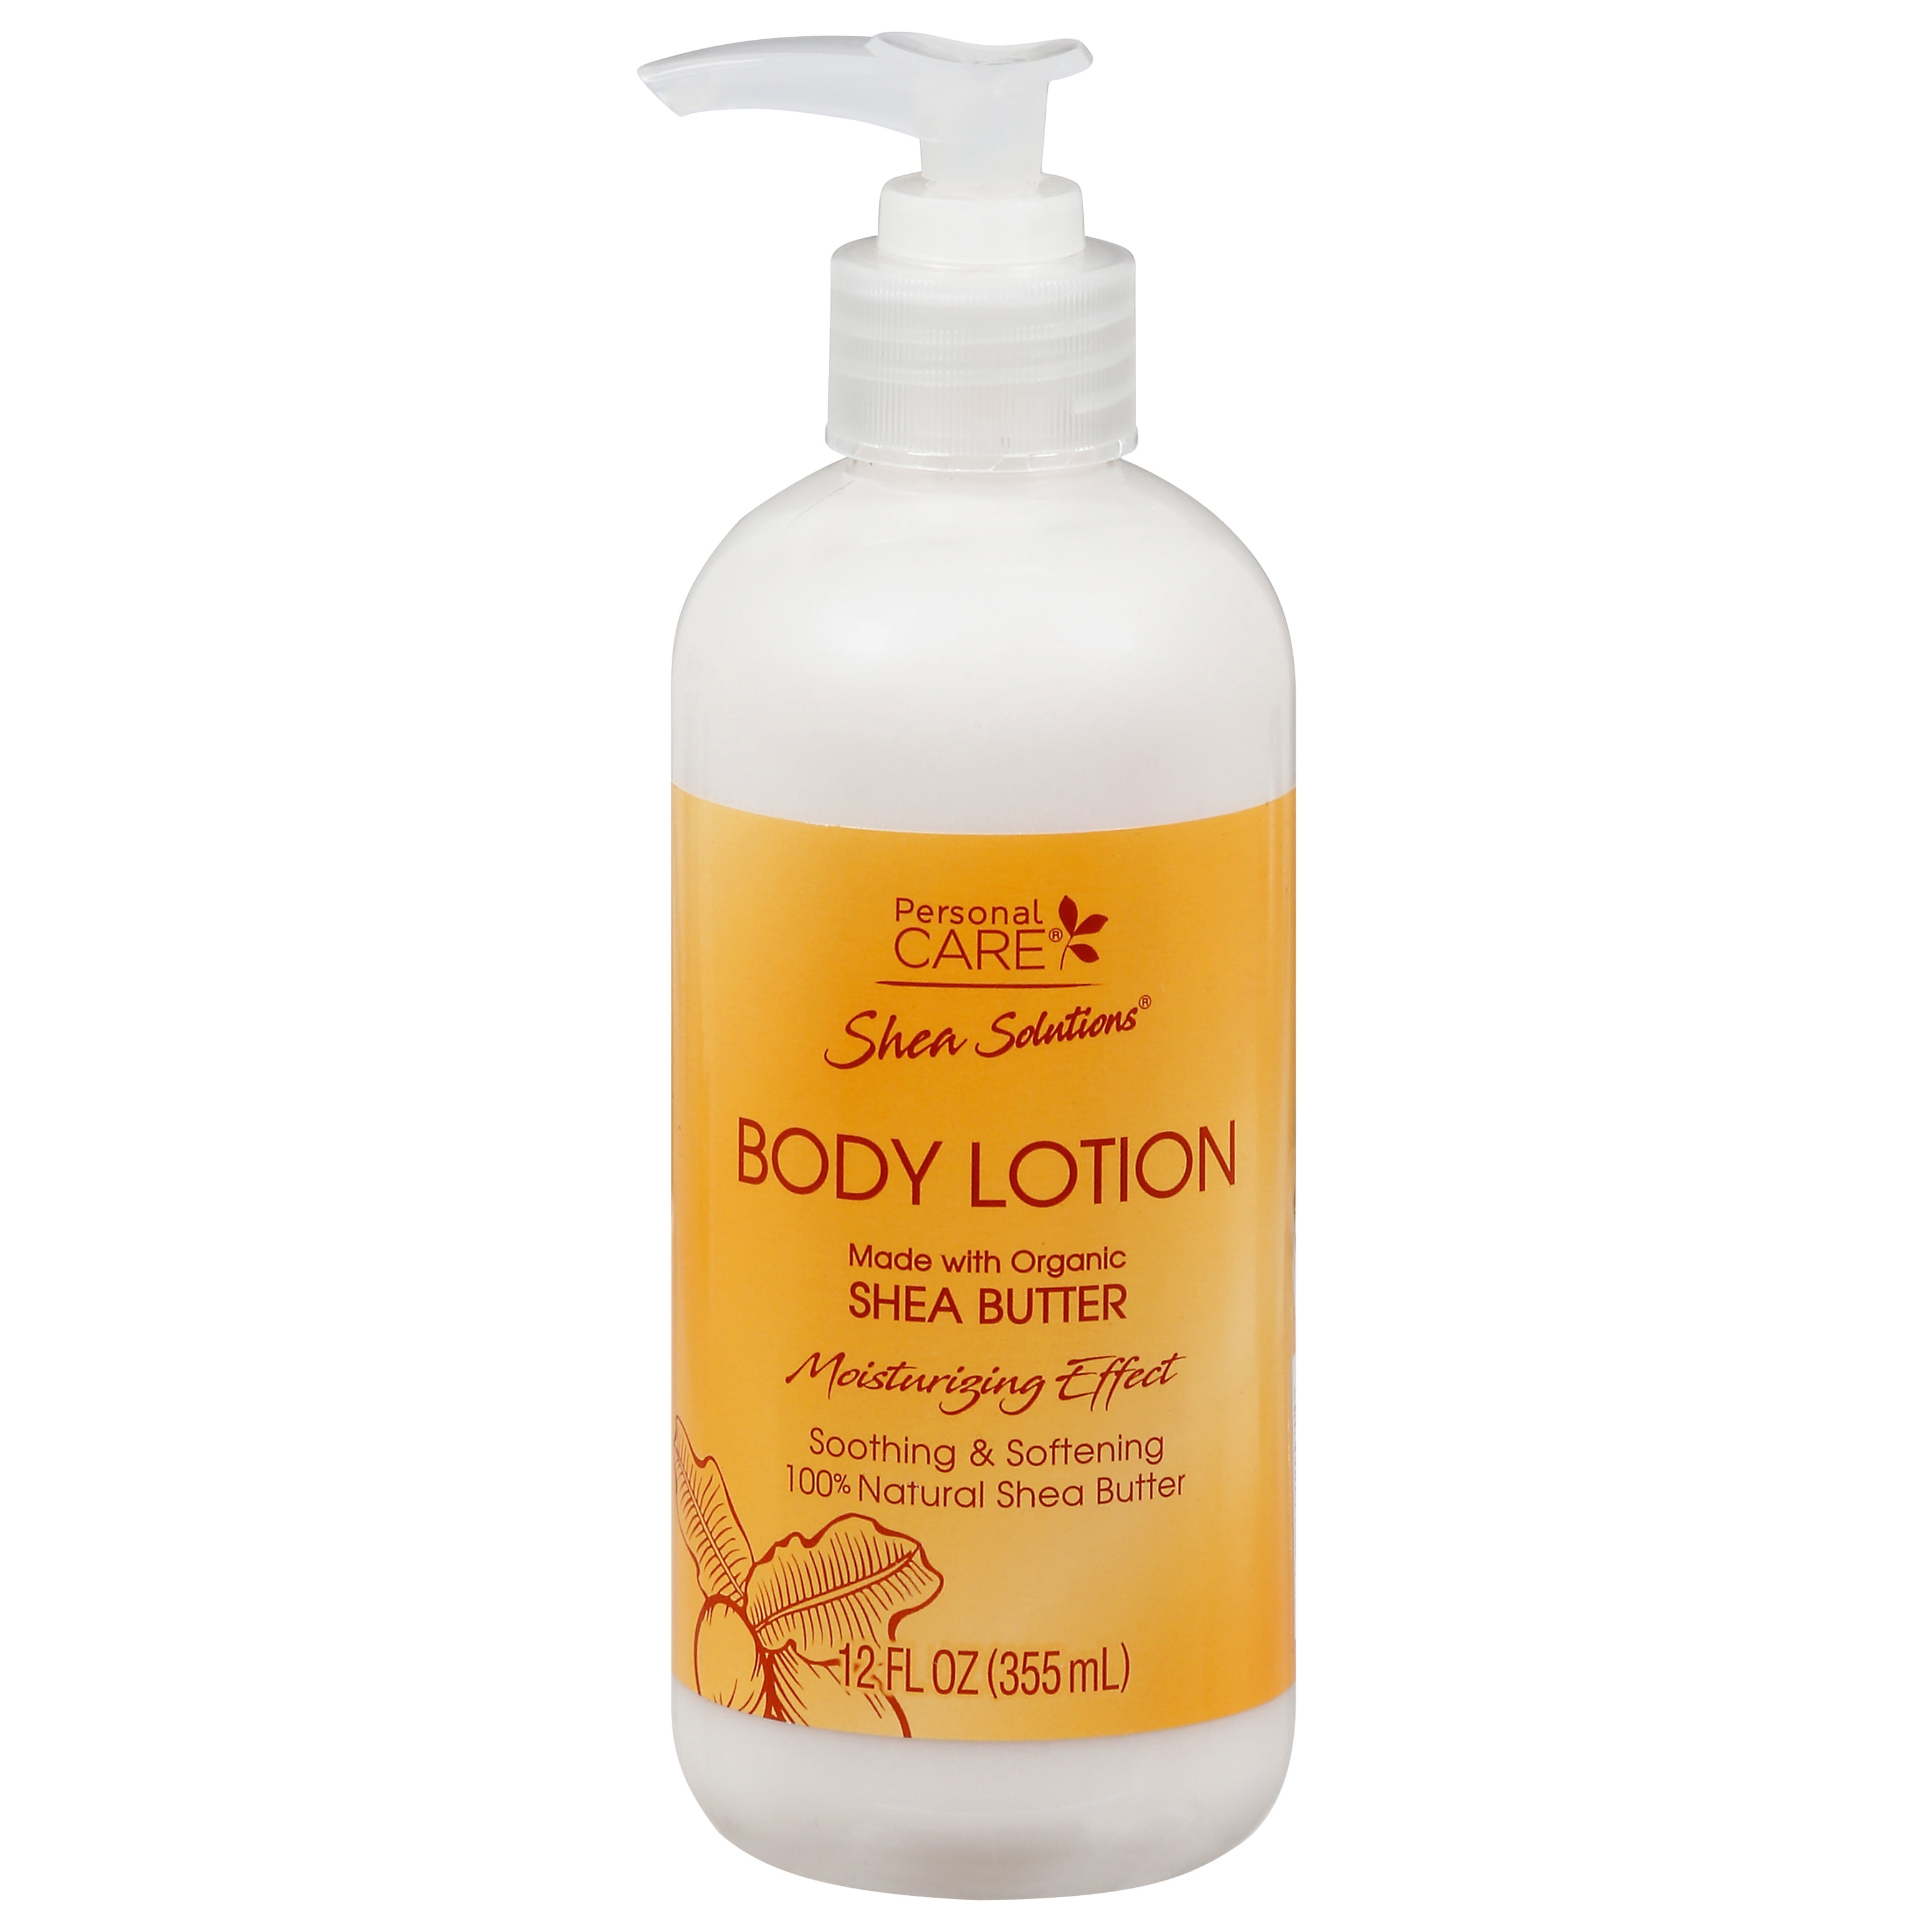 Personal Care Solutions Body Lotion. Soothes & Softens Skin. Made with Natural Shea Butter. 12 oz / 355 ml Walmart.com